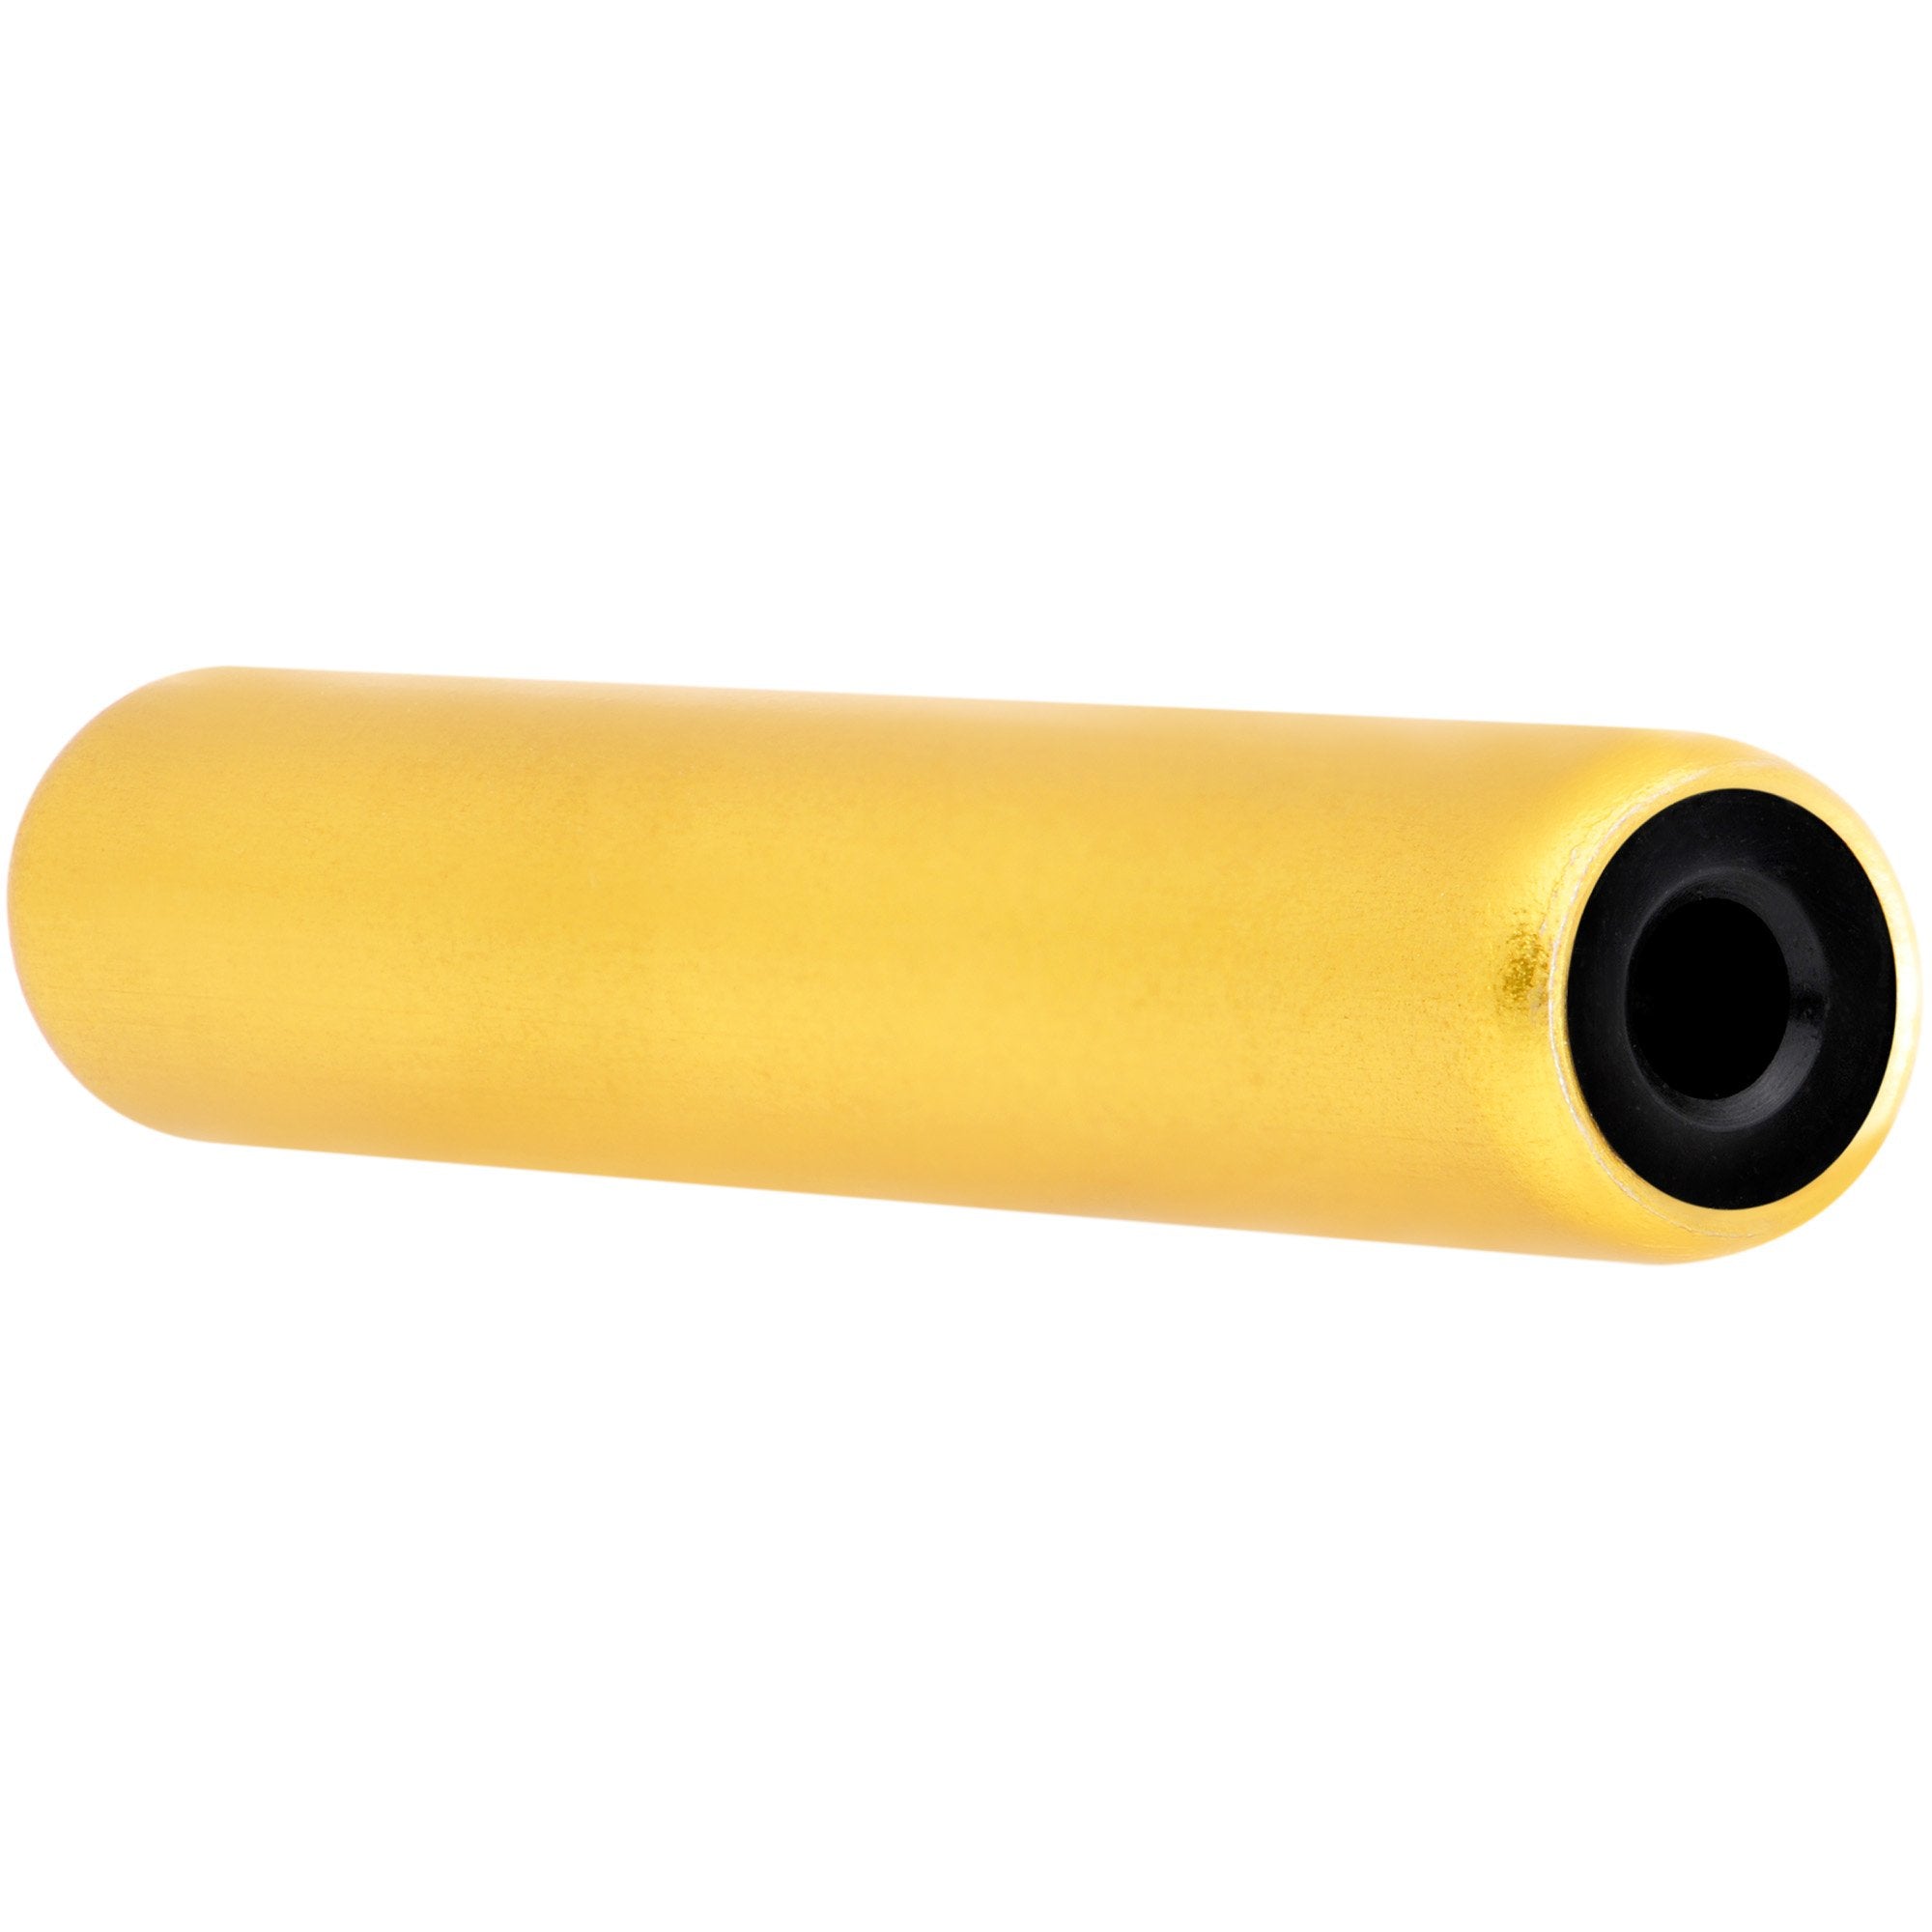 3mm to 4mm Yellow Aluminum Body Piercing Ball Removal Tool